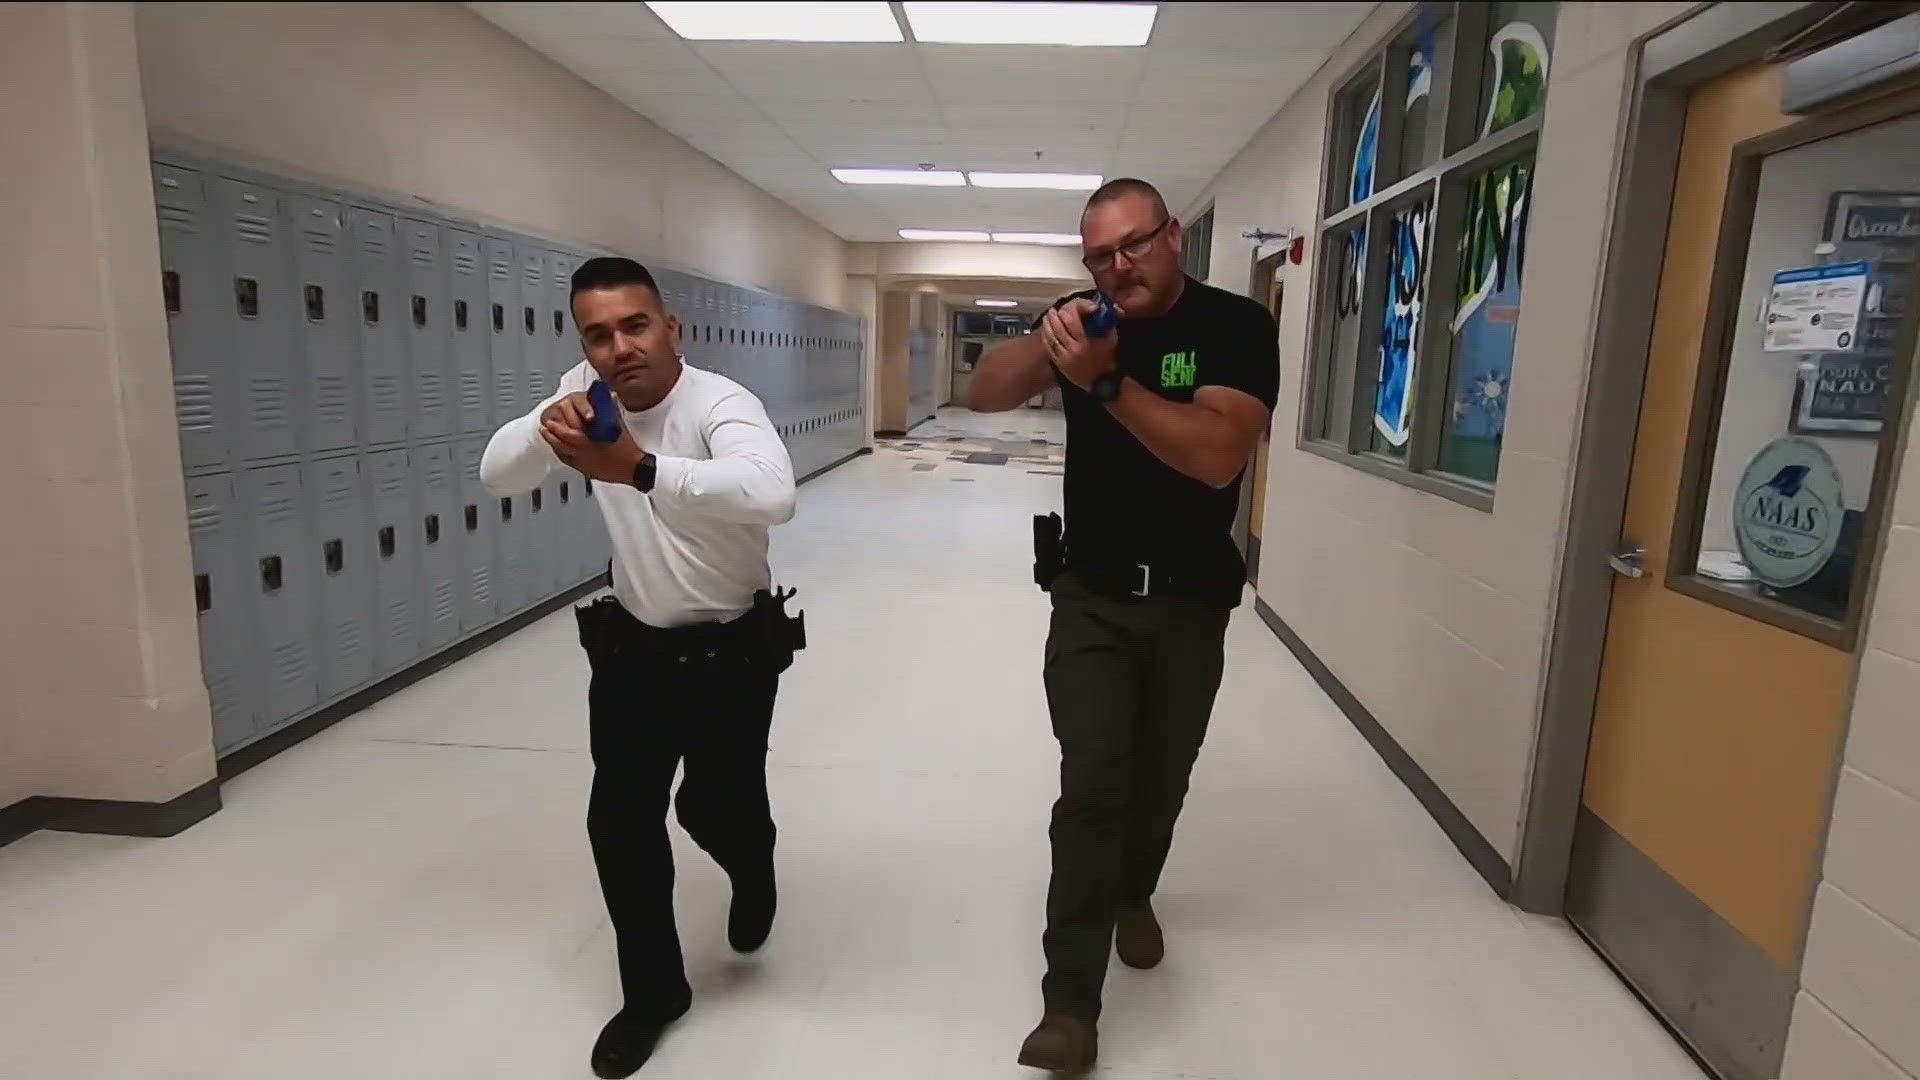 Following Monday's deadly shooting at a Christian school in Nashville, the importance of well-equipped school resource officers takes center stage.